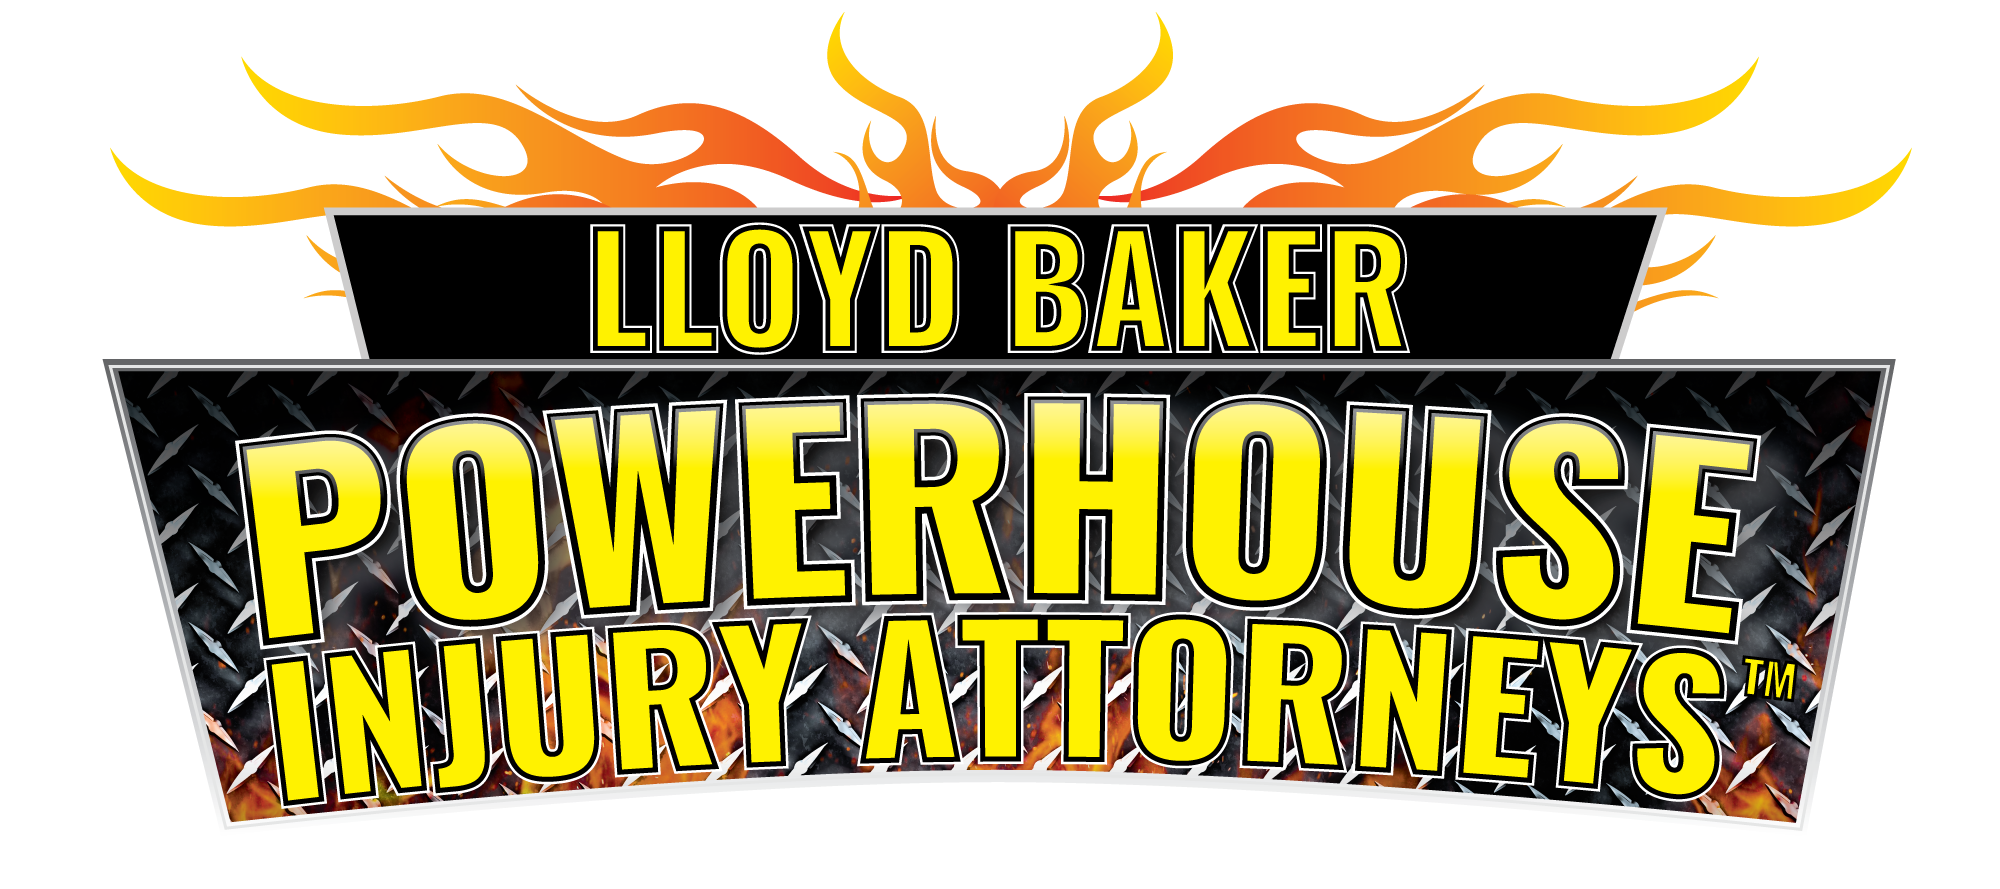 Lloyd Baker Injury Attorneys Shares The Benefits Of Hiring An Excellent Personal Injury Firm.